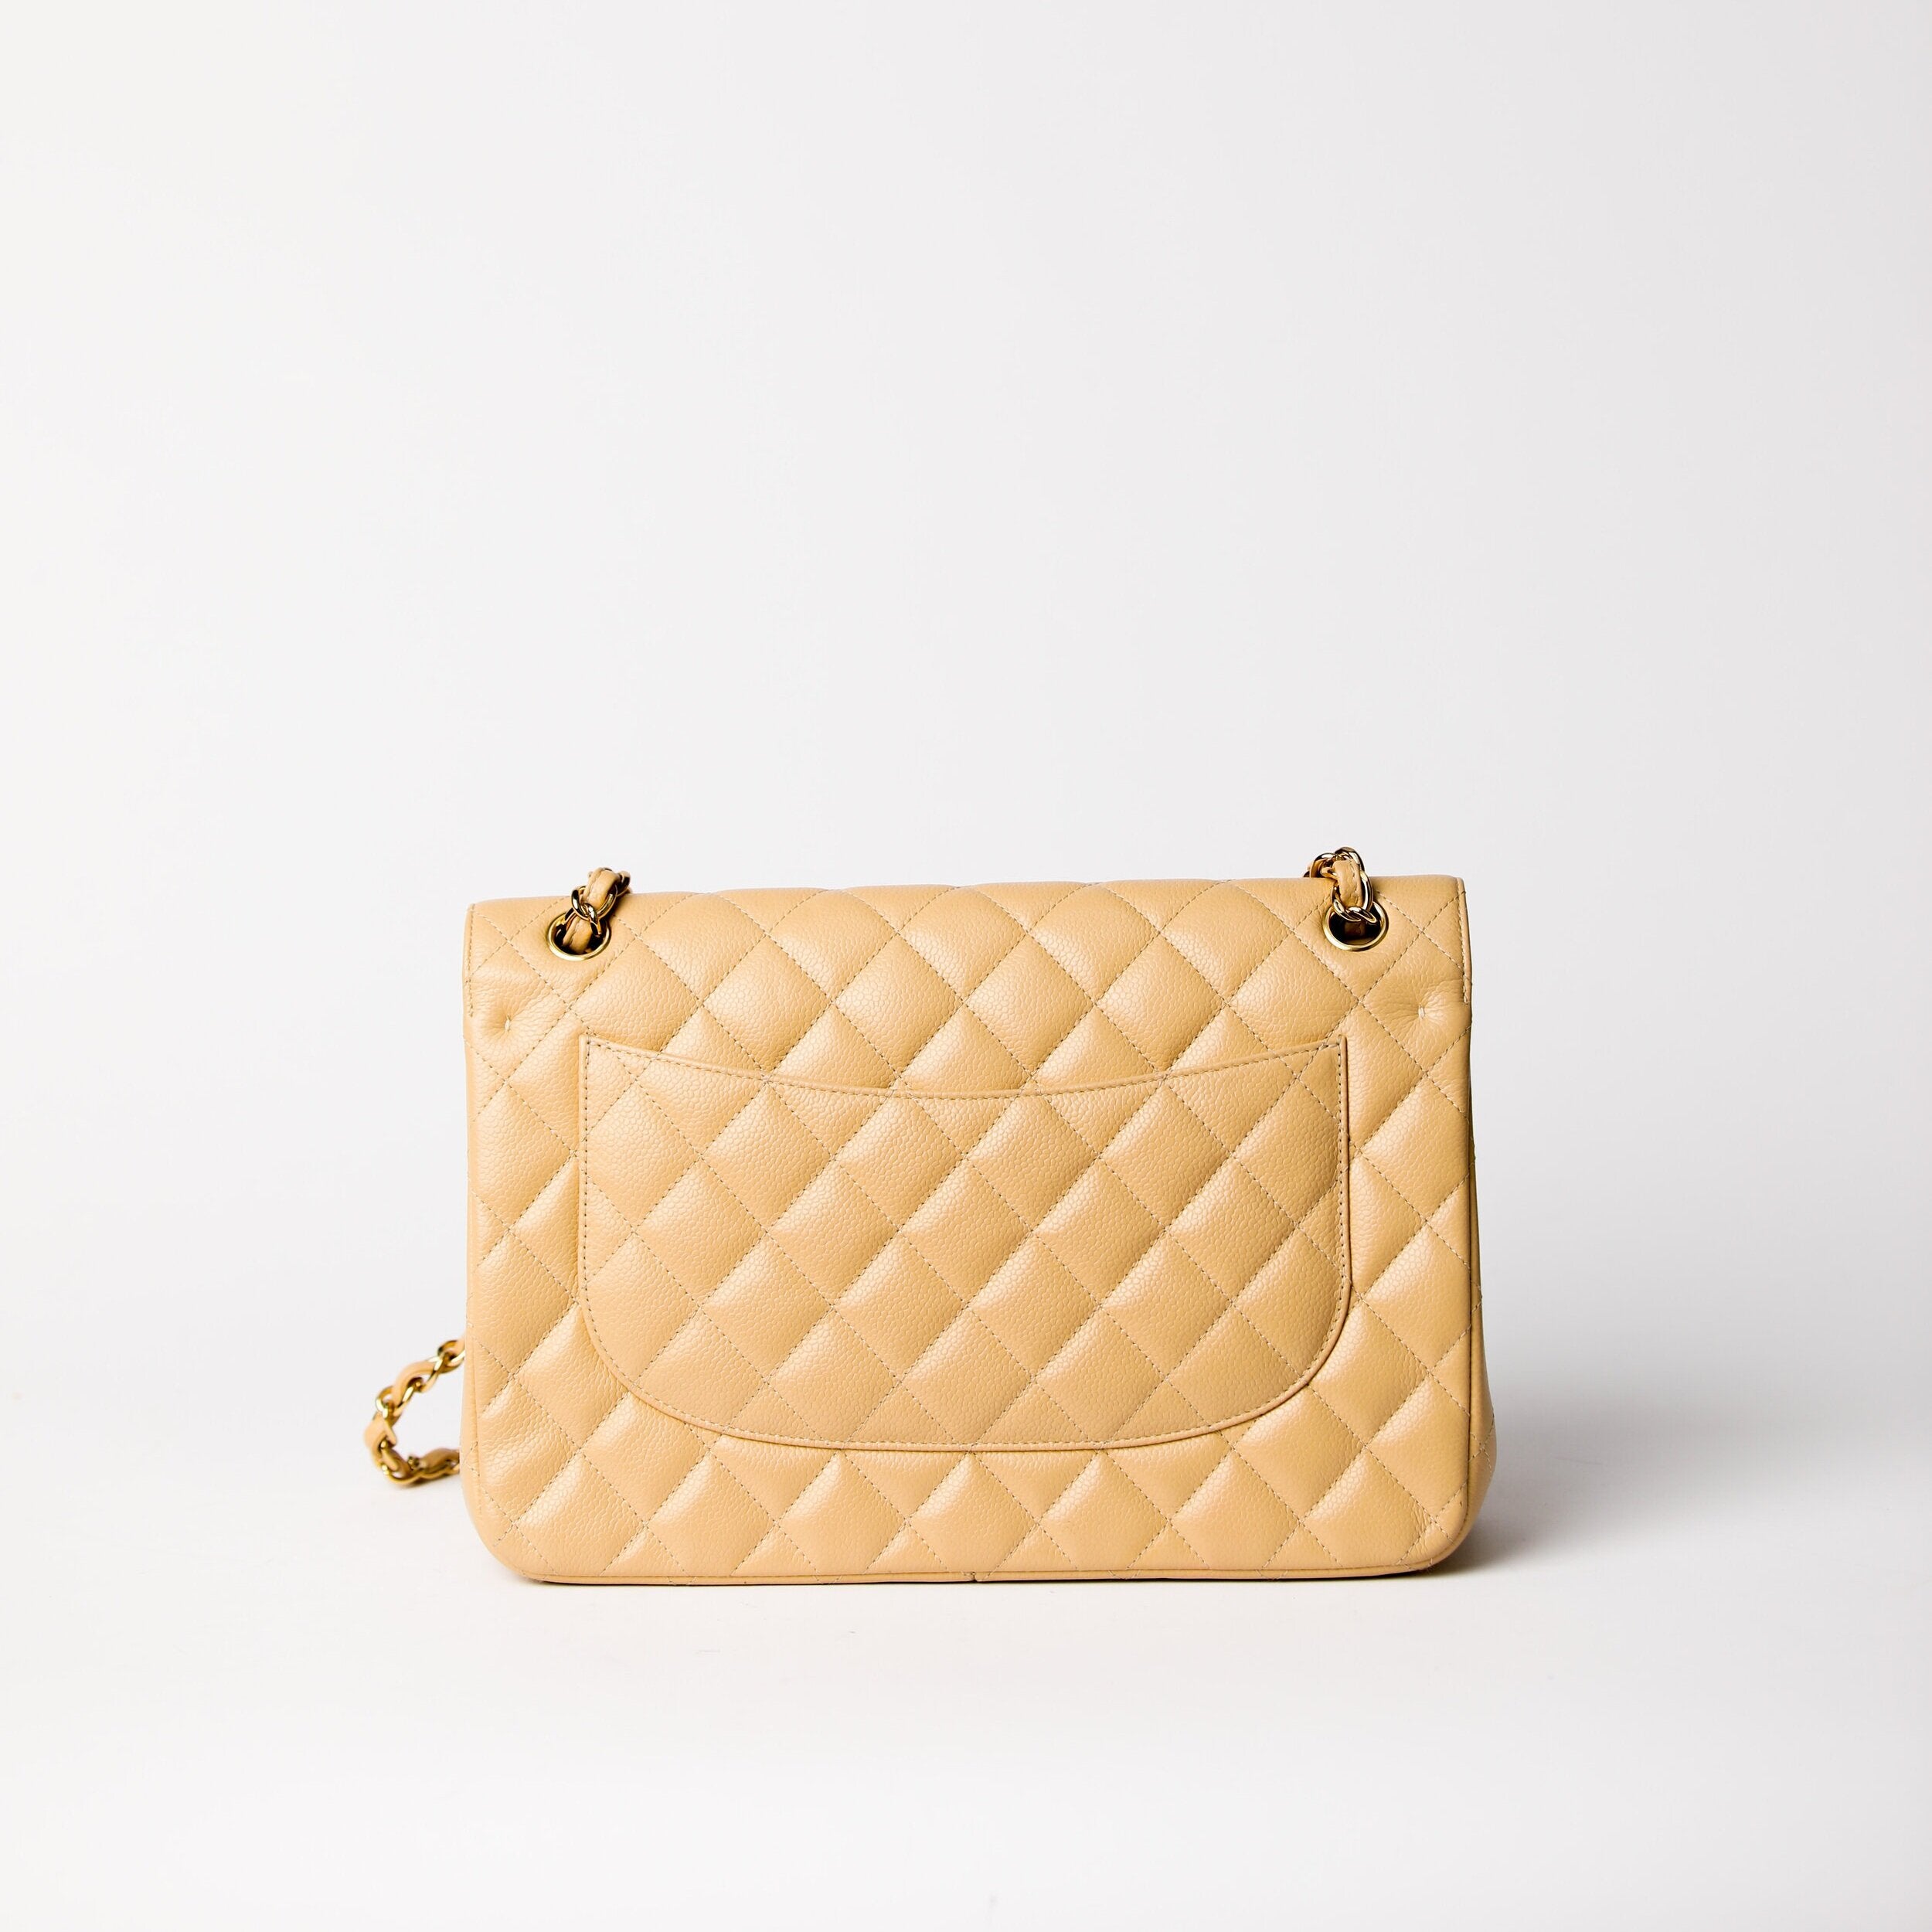 Chanel Yellow Lambskin Quilted Leather Medium Double Flap Bag